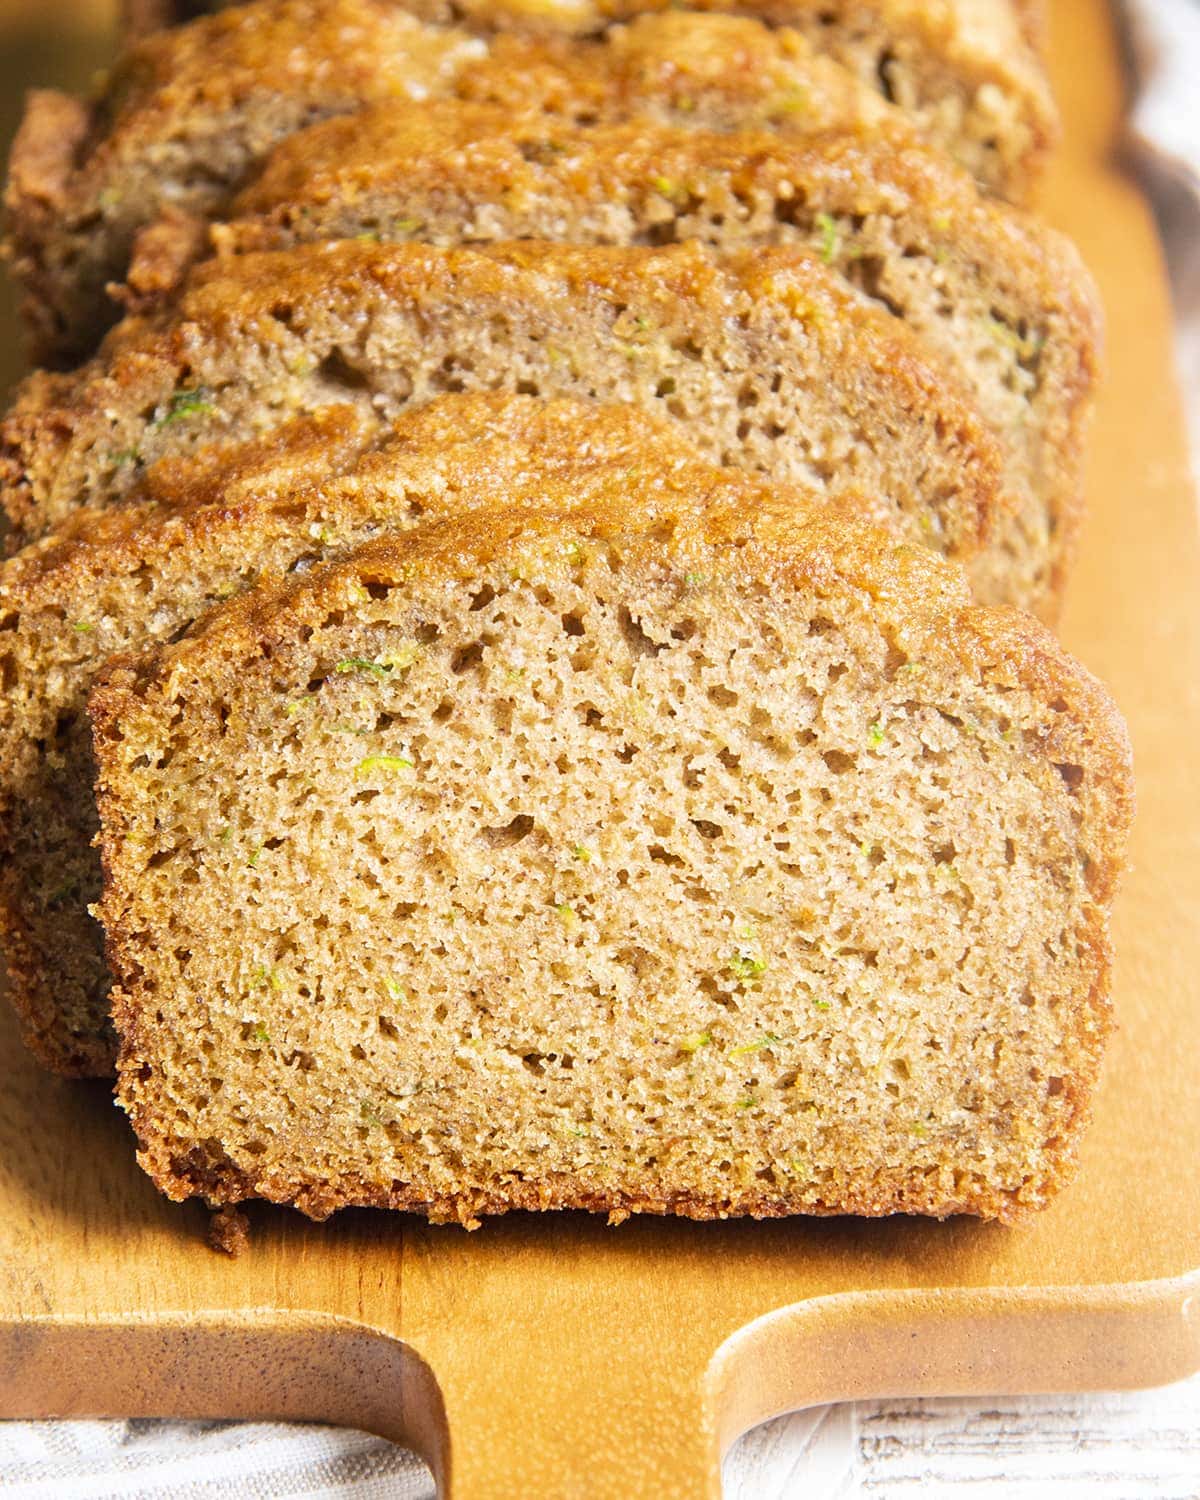 Slices of zucchini bread leaning on one another.